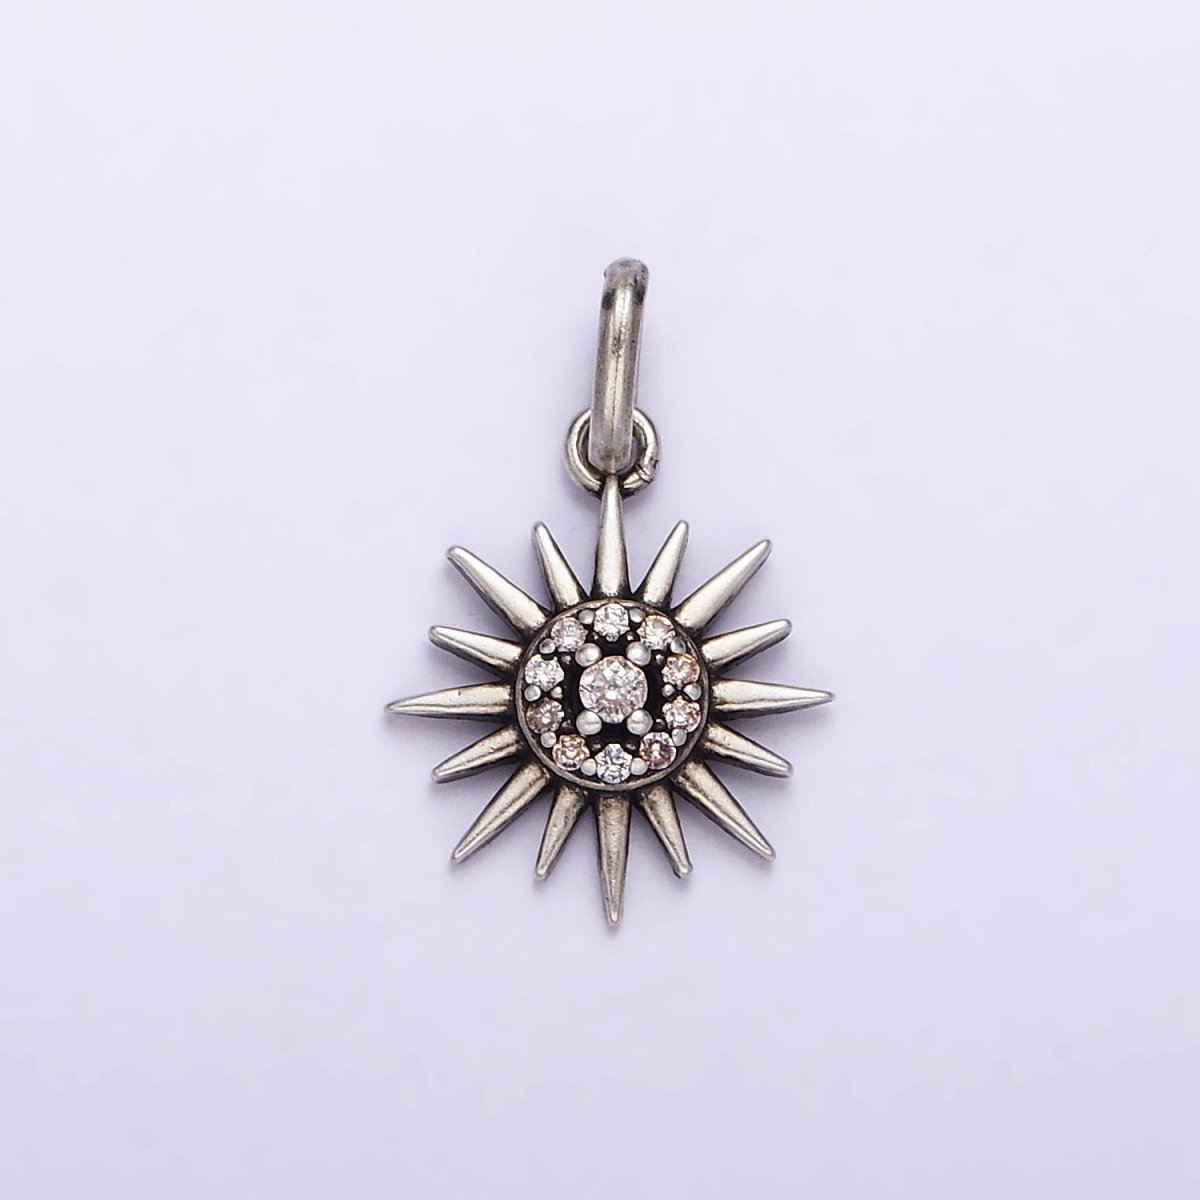 Dainty Sun Charm in 925 Sterling Silver Pendant Micro Pave Sun Ray Celestial Jewelry SL-302 - DLUXCA